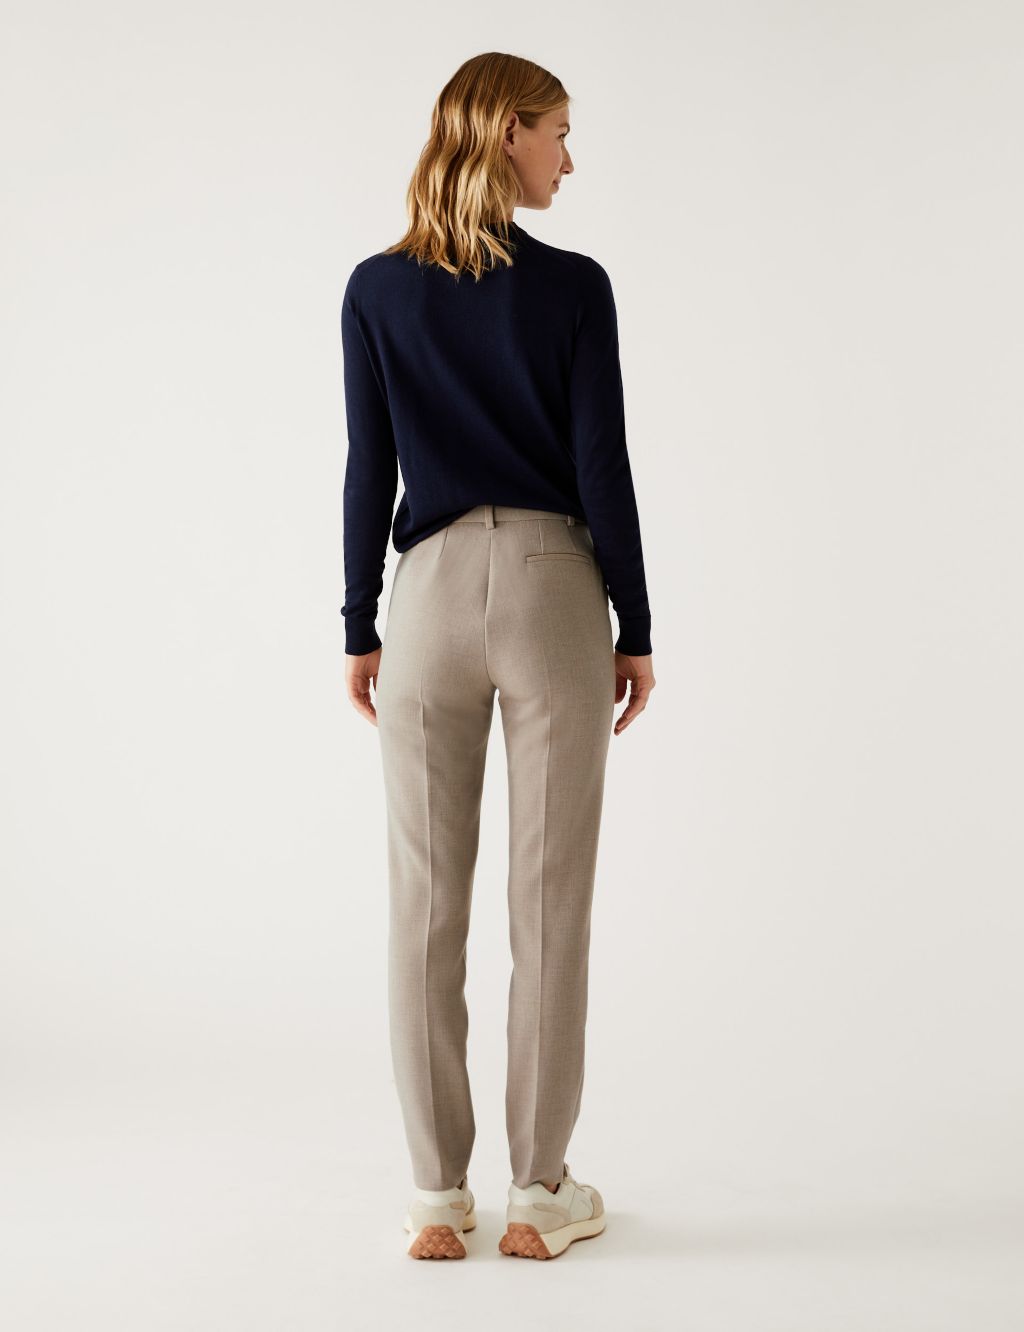 Marl Slim Fit Ankle Grazer Trousers image 4